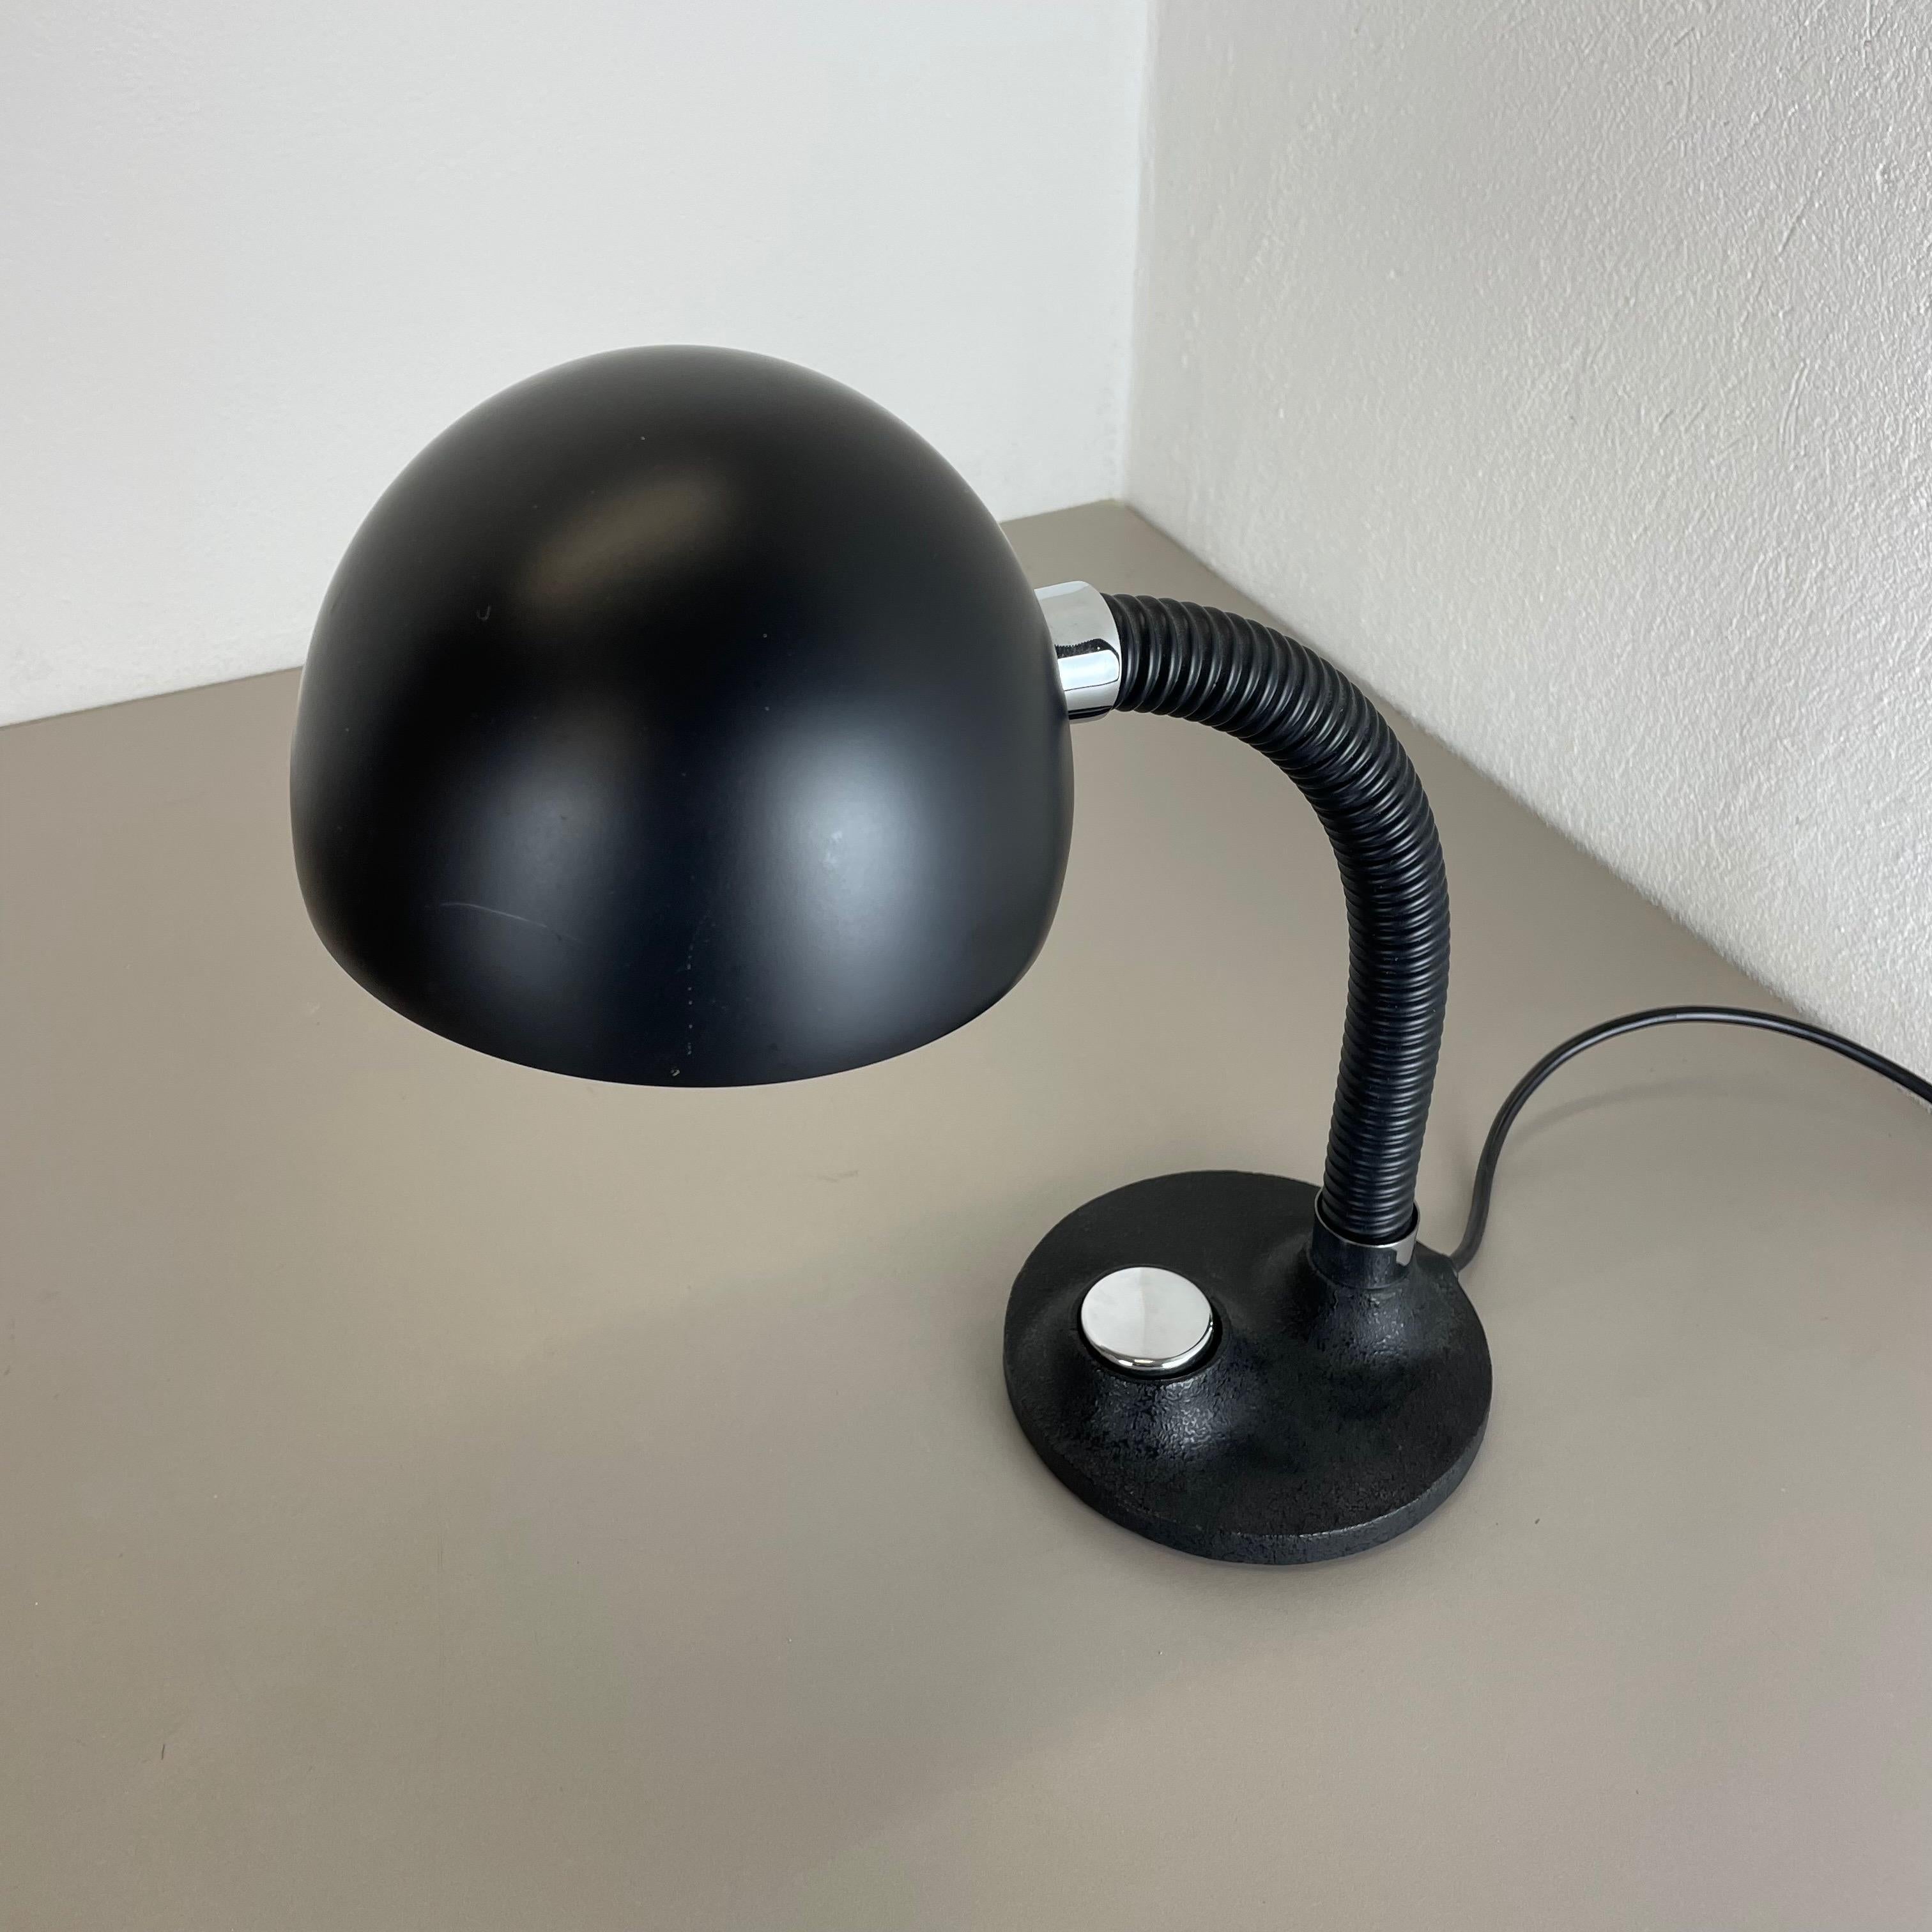 Modernist SPACE AGE Metal Table Light by Hillebrand Leuchten, Germany, 1970s In Good Condition For Sale In Kirchlengern, DE